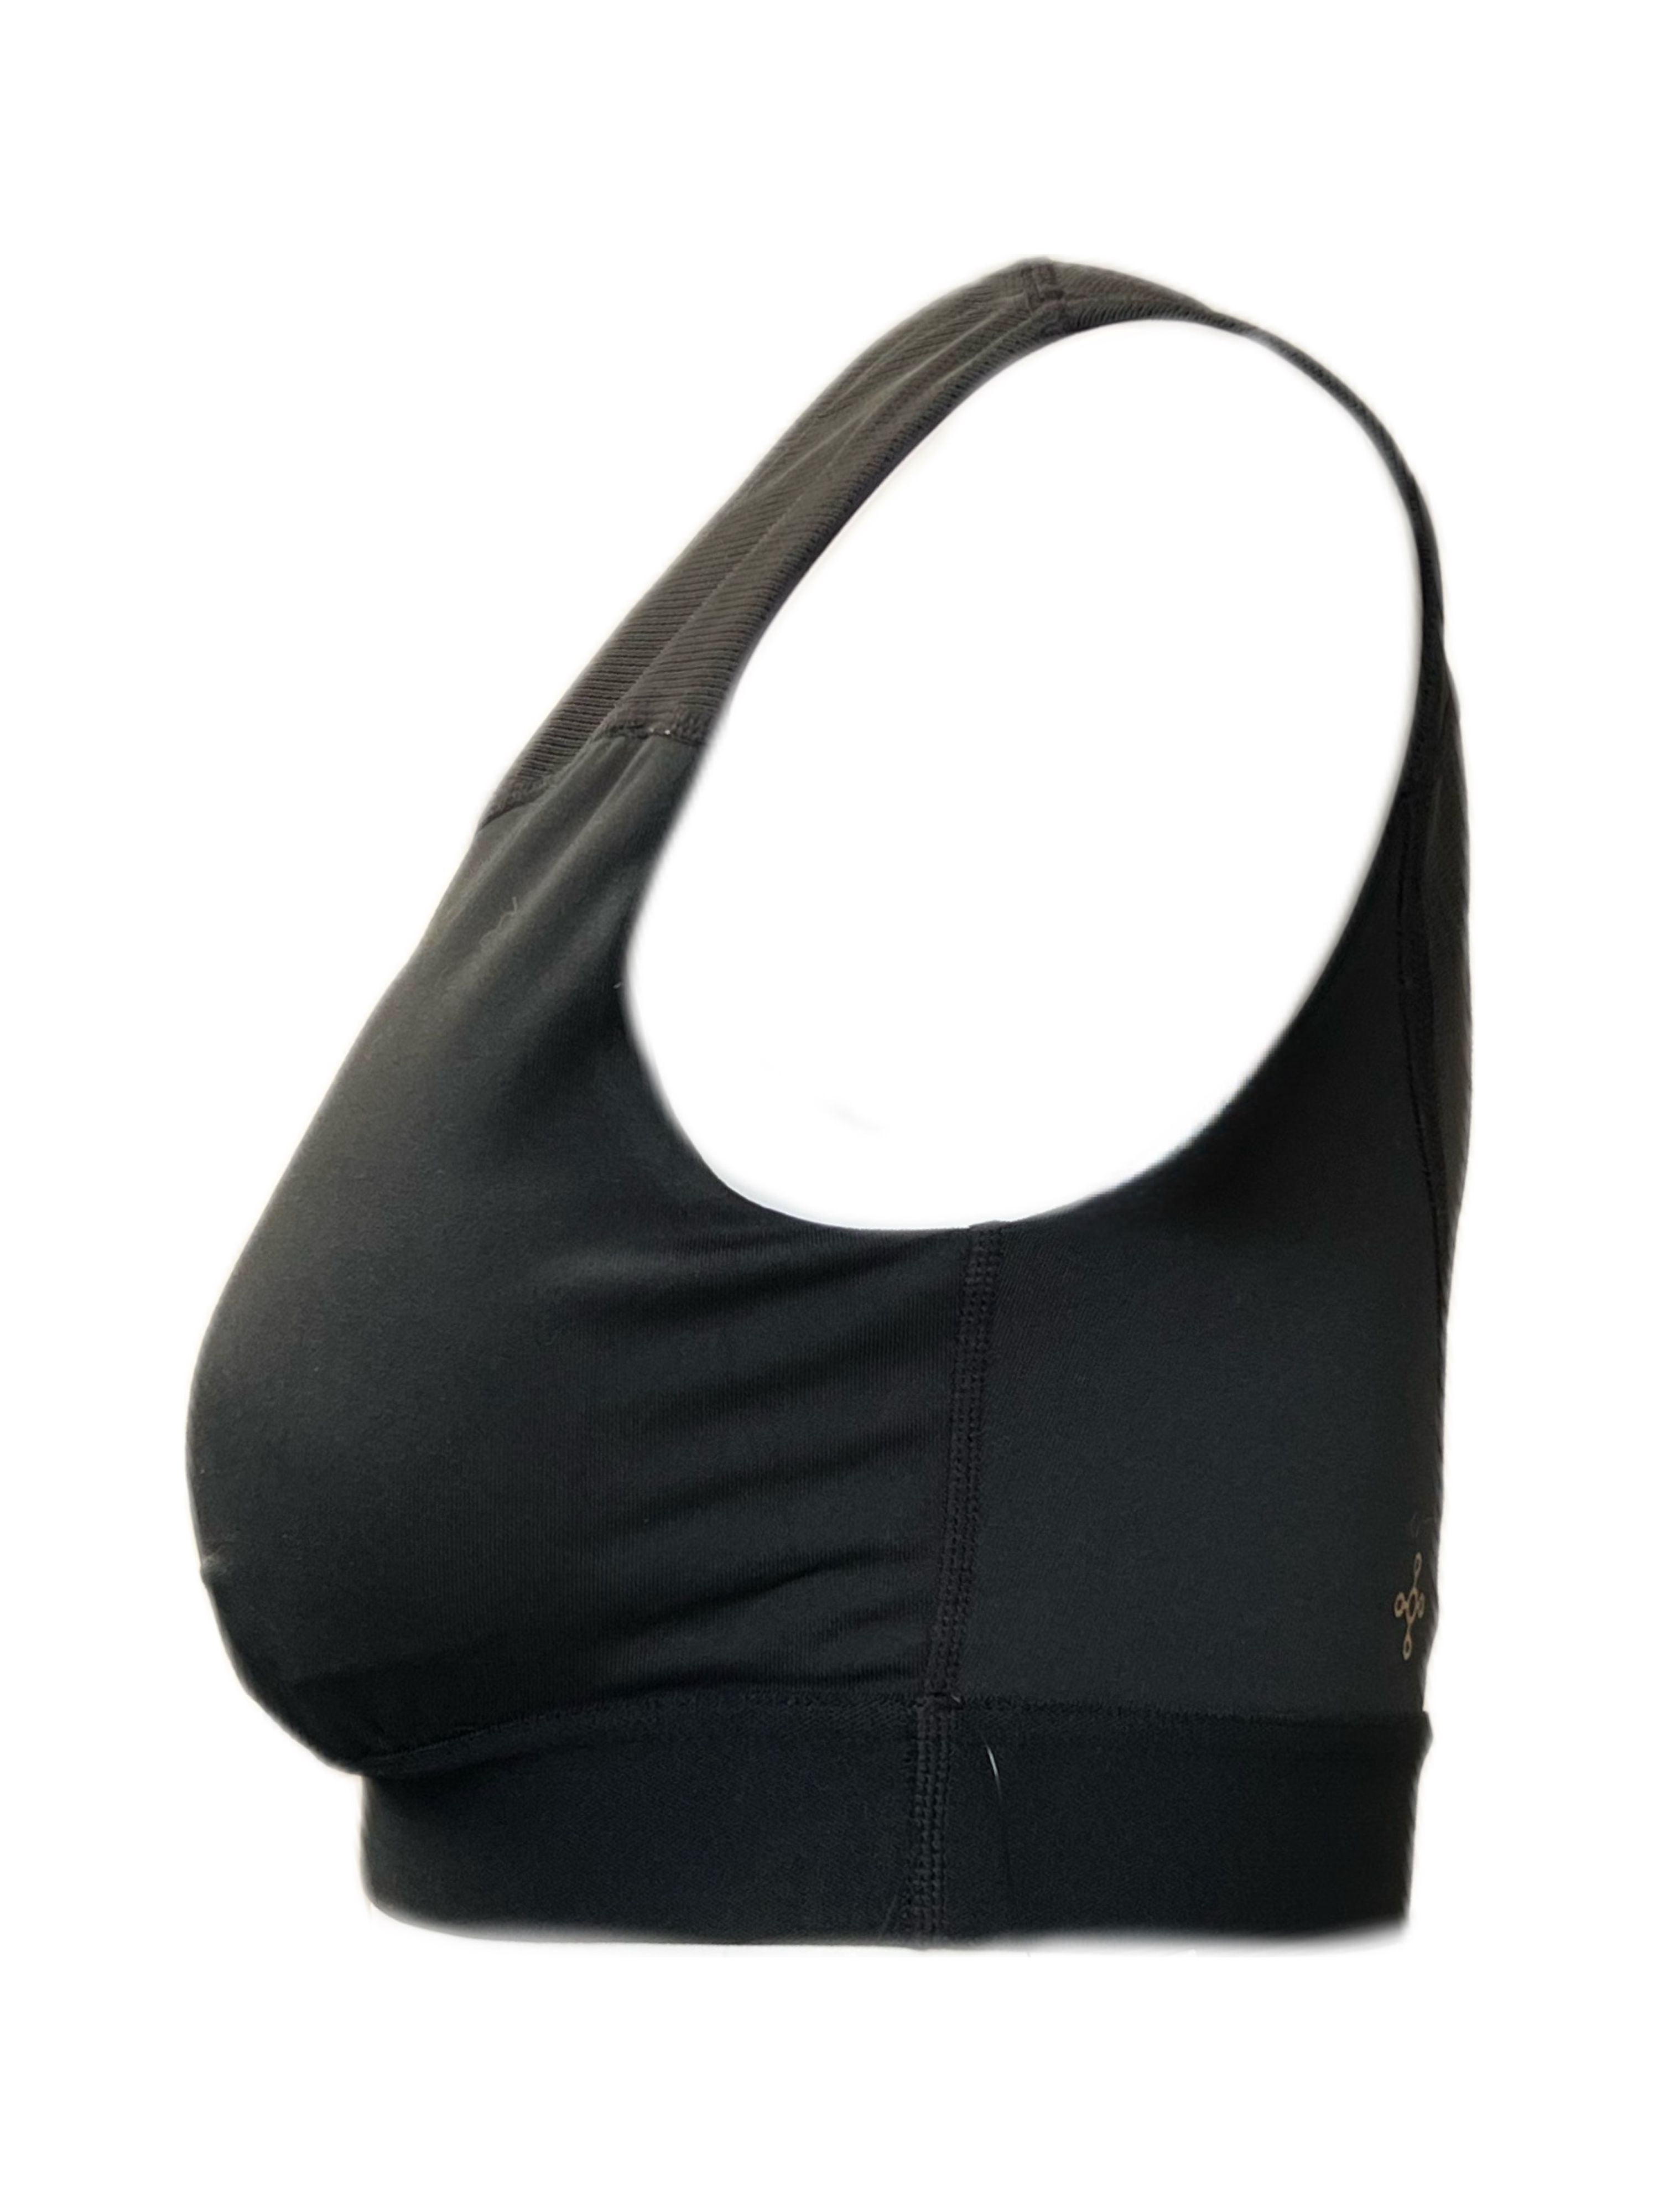 Tommie Copper Pro-Grade Women's Shoulder Support Bra - Posture and Stability